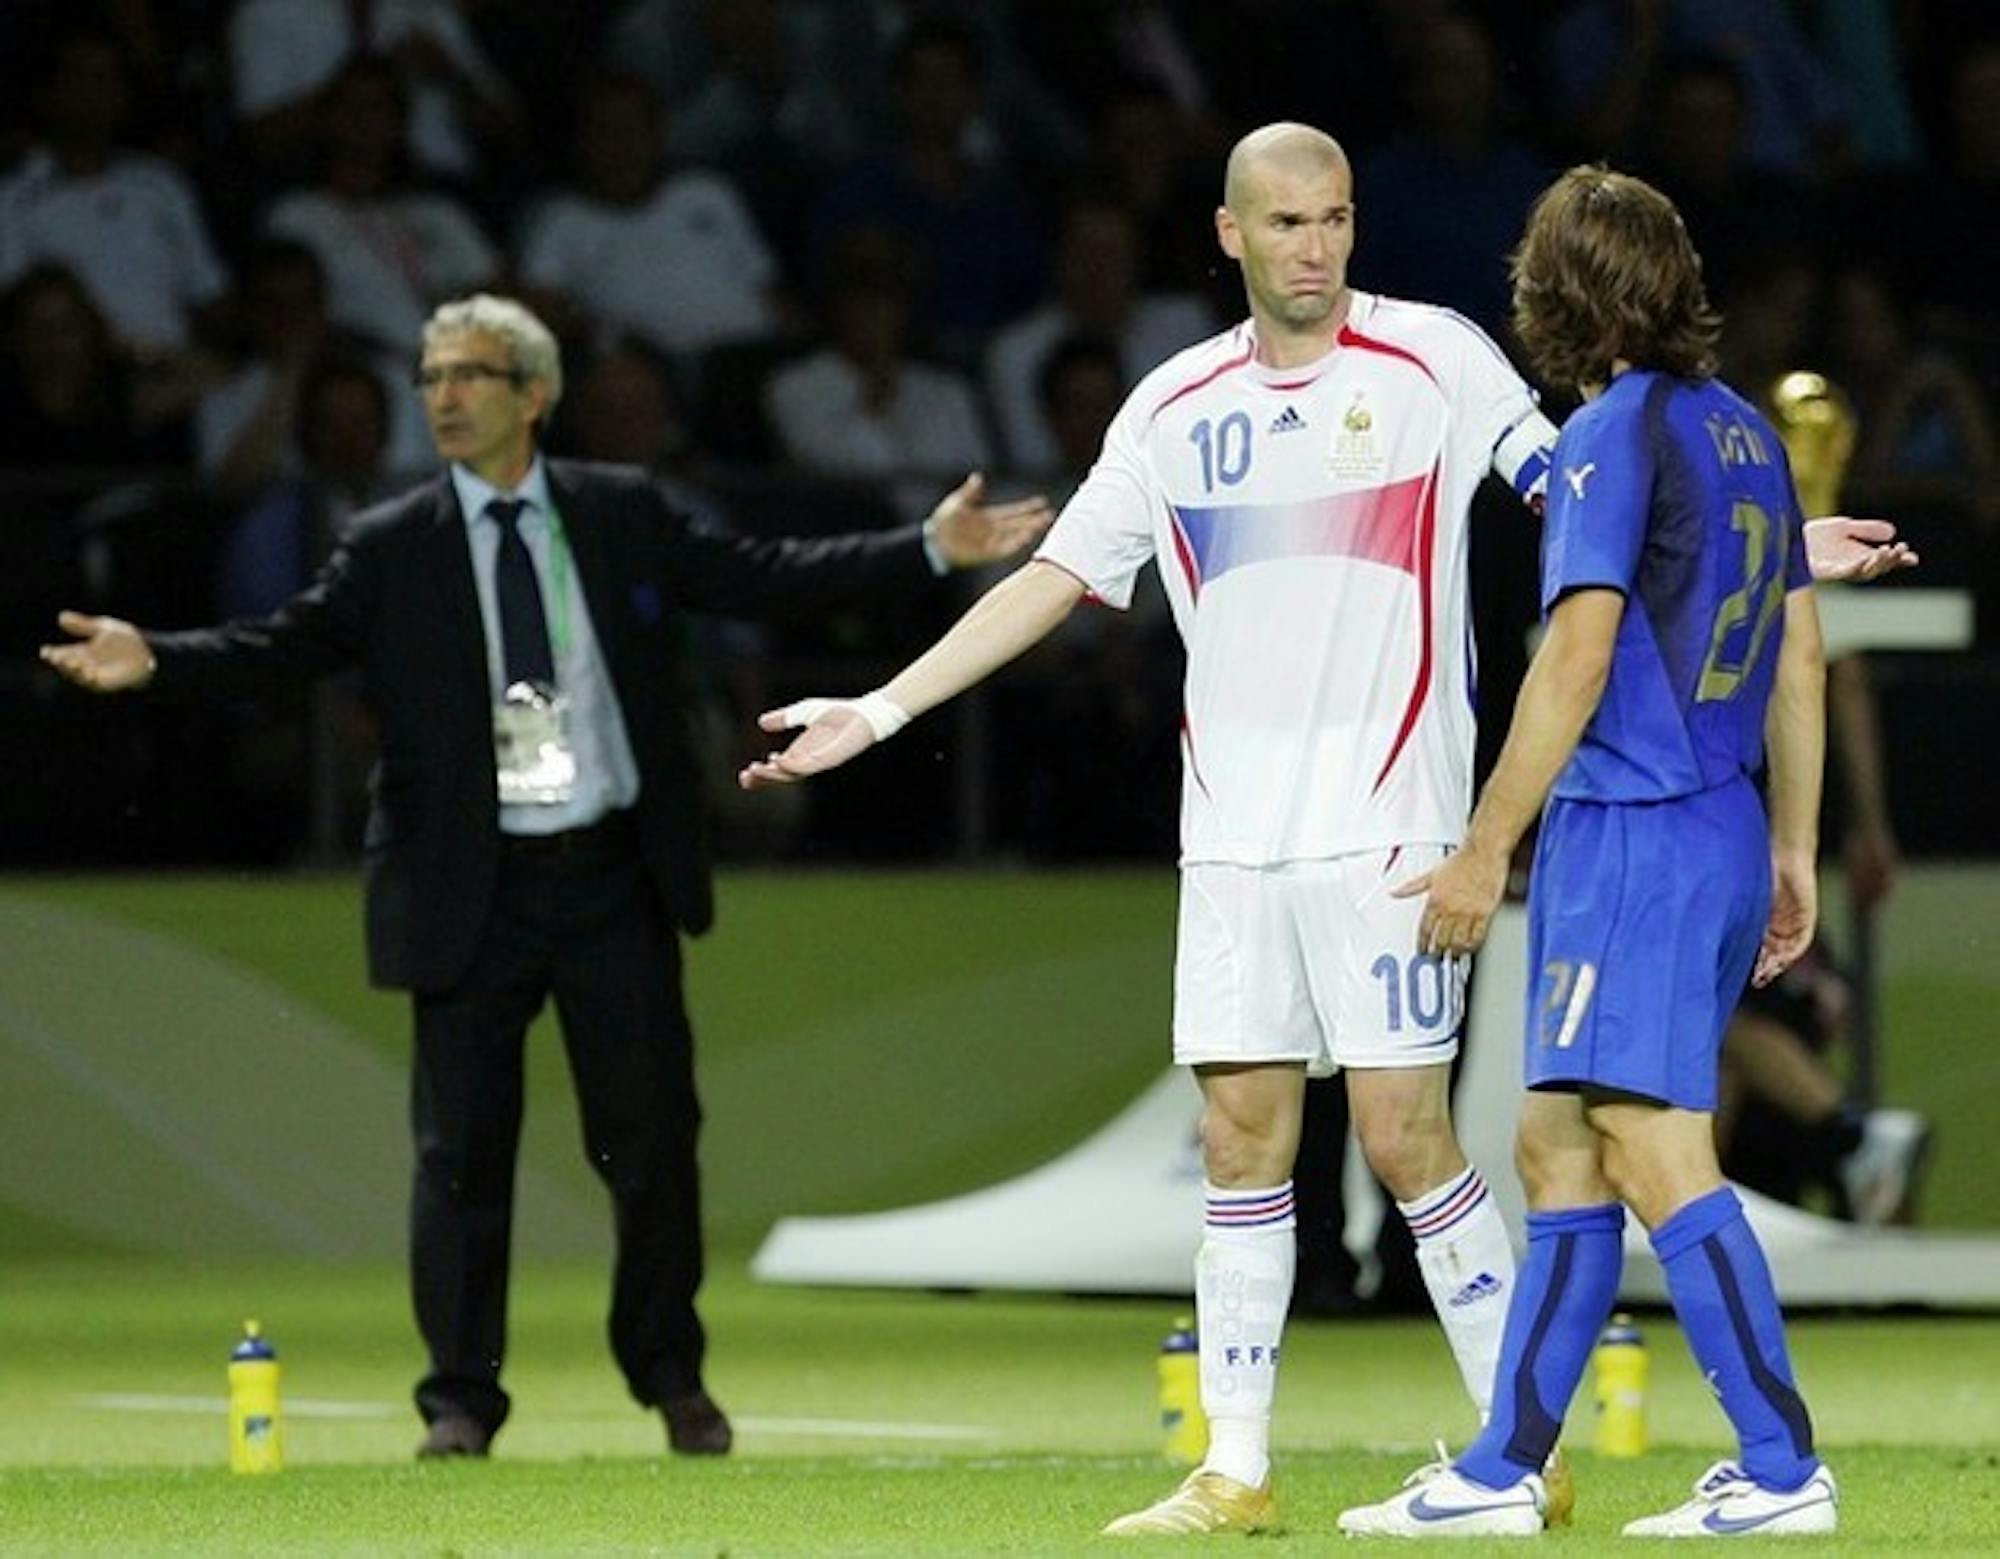 Zidane feigns innocence after his attack on Materazzi while the refereeing team attempts to sort out exactly what had just transpired.Zidane feigns innocence after his attack on Materazzi while the refereeing team attempts to sort out exactly what had just transpired.